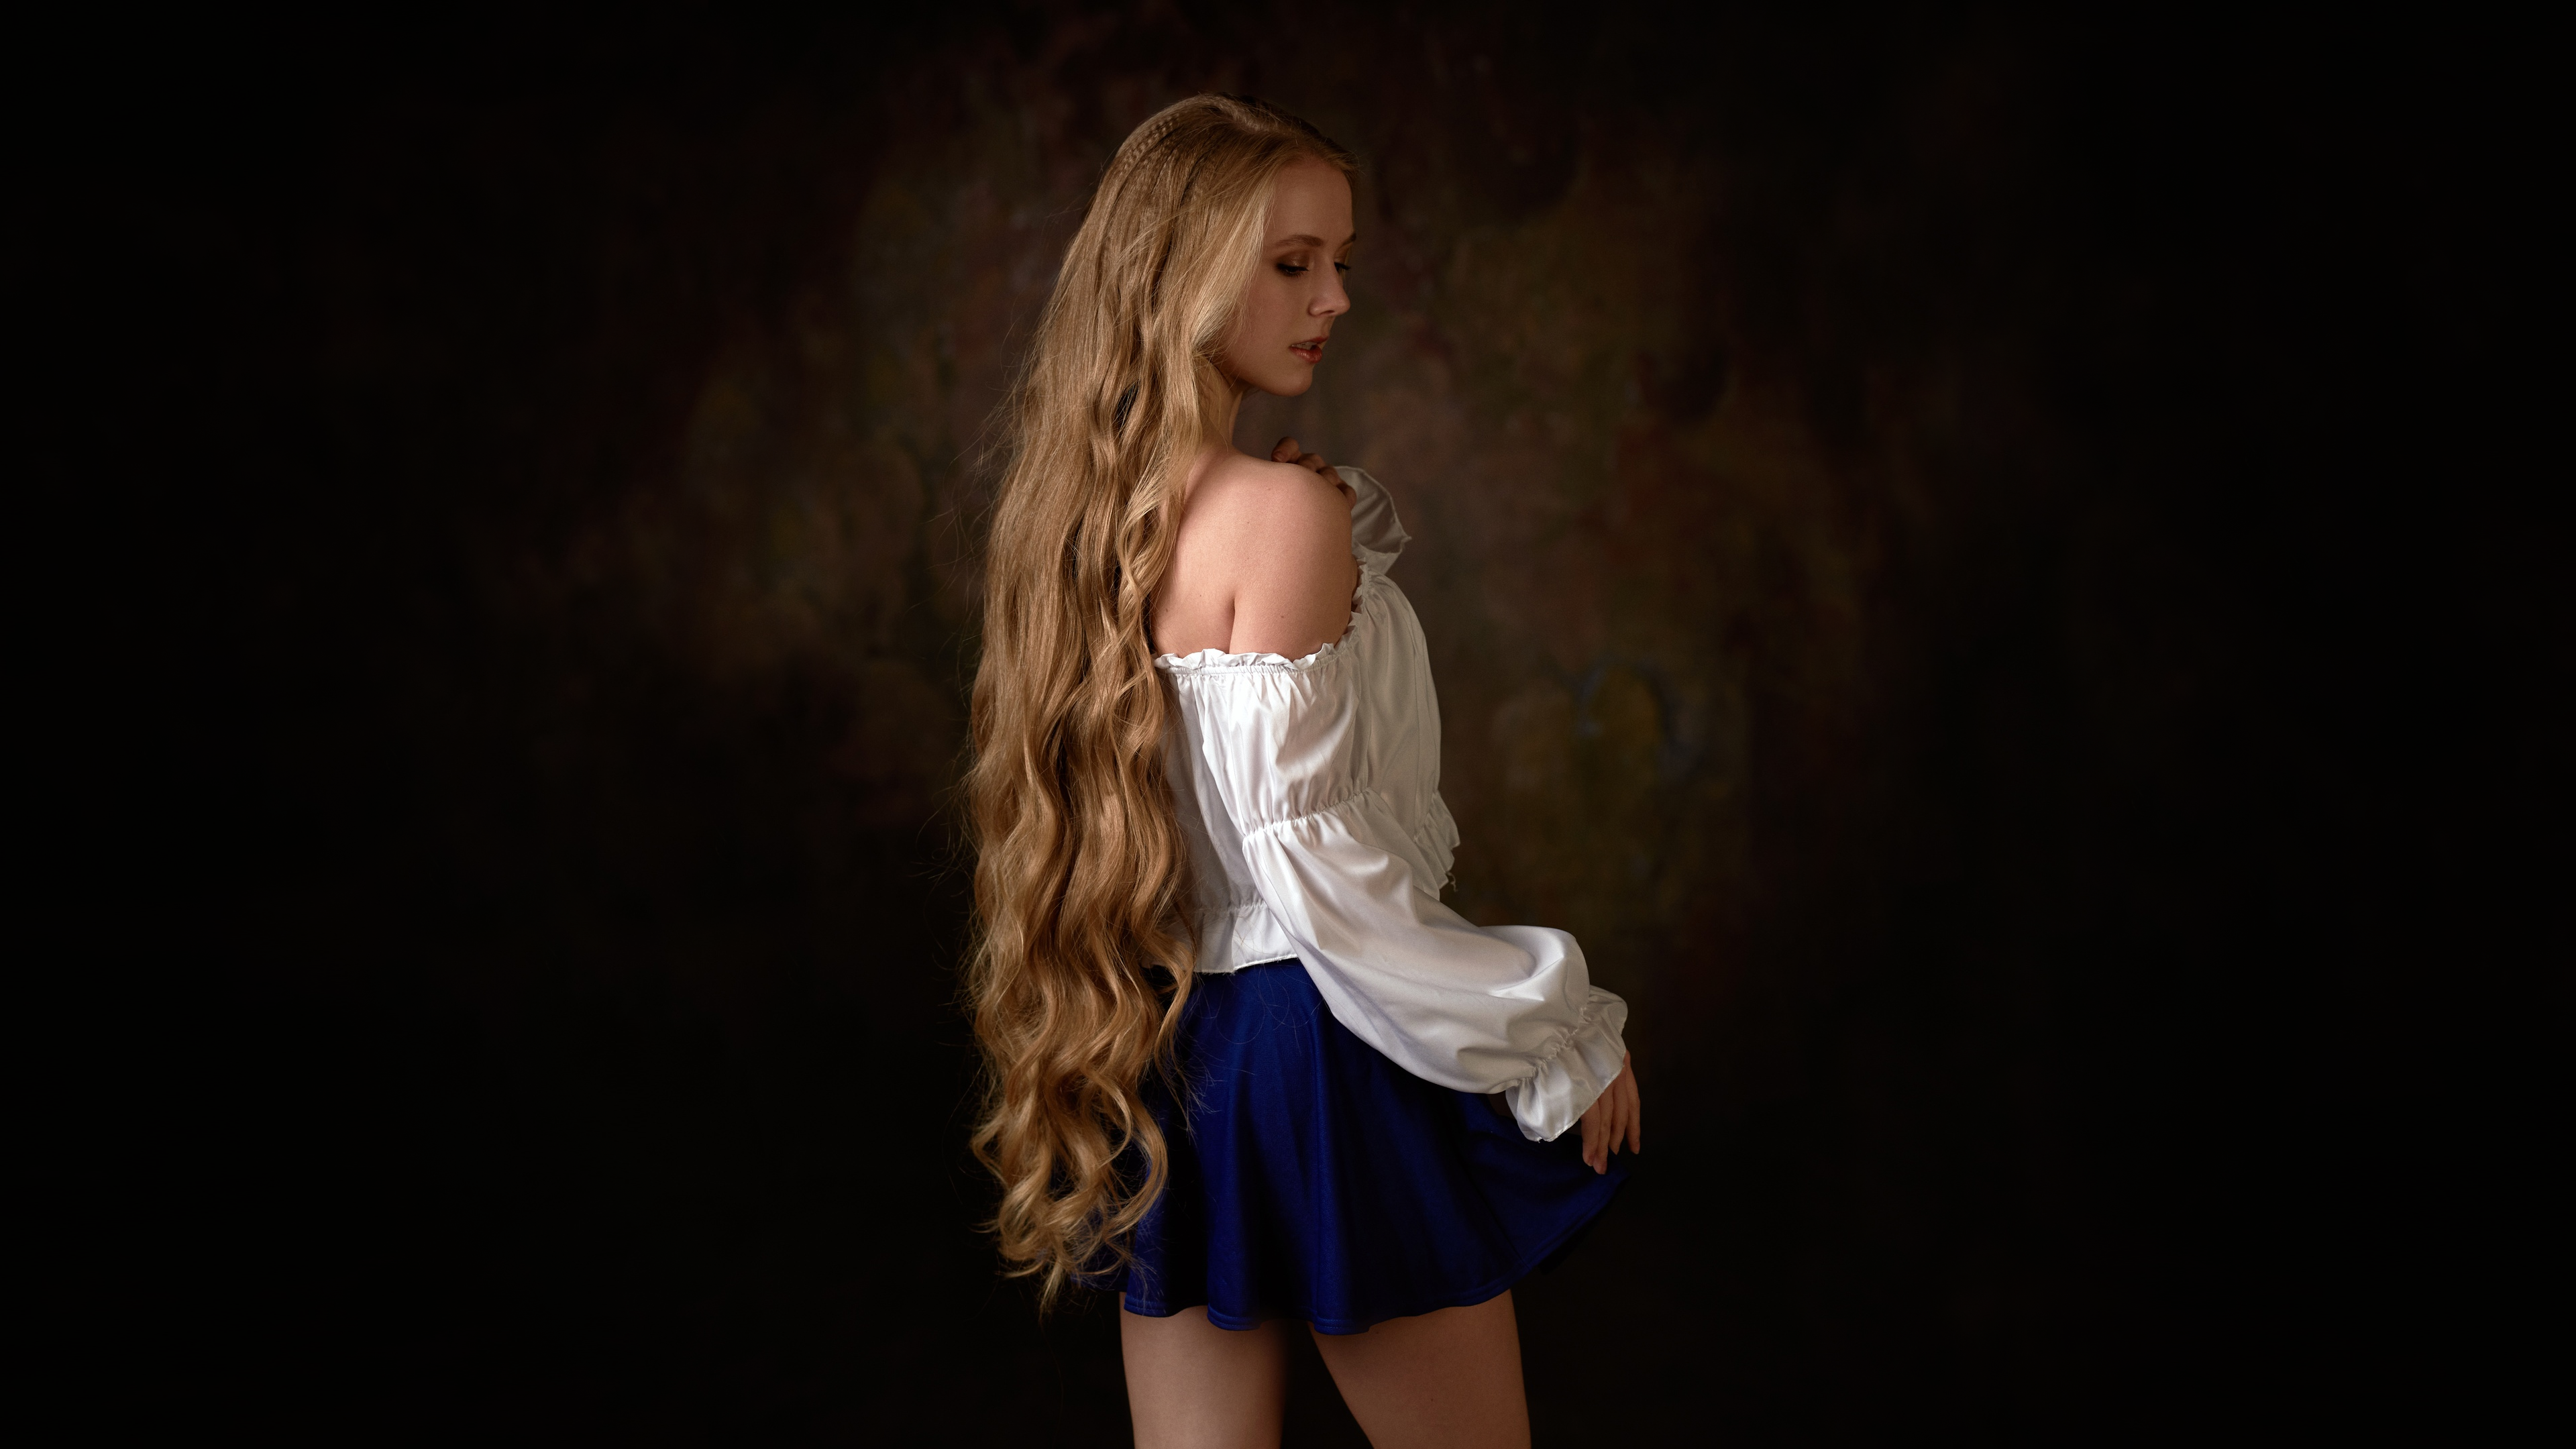 Max Pyzhik Women Model Blonde Long Hair Profile Parted Lips Bare Shoulders White Tops Behind Studio  3840x2160